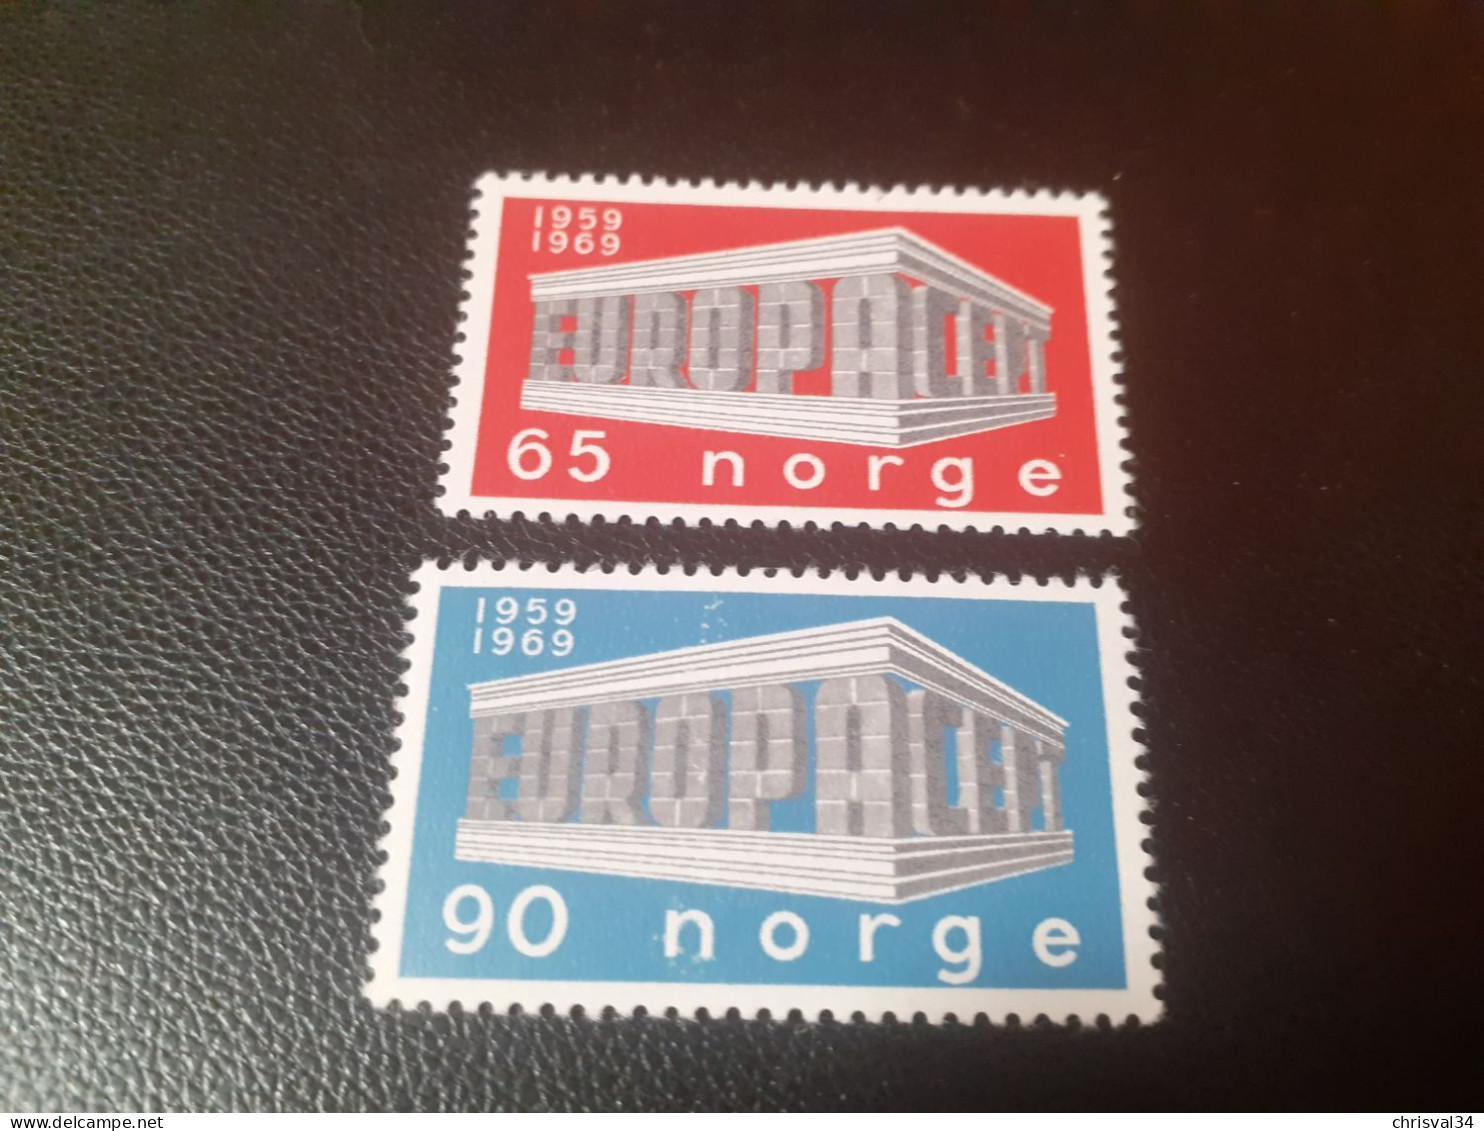 TIMBRES   NORVEGE  ANNEE 1969   N  538 / 539   COTE  3,00  EUROS   NEUFS  LUXE** - Neufs